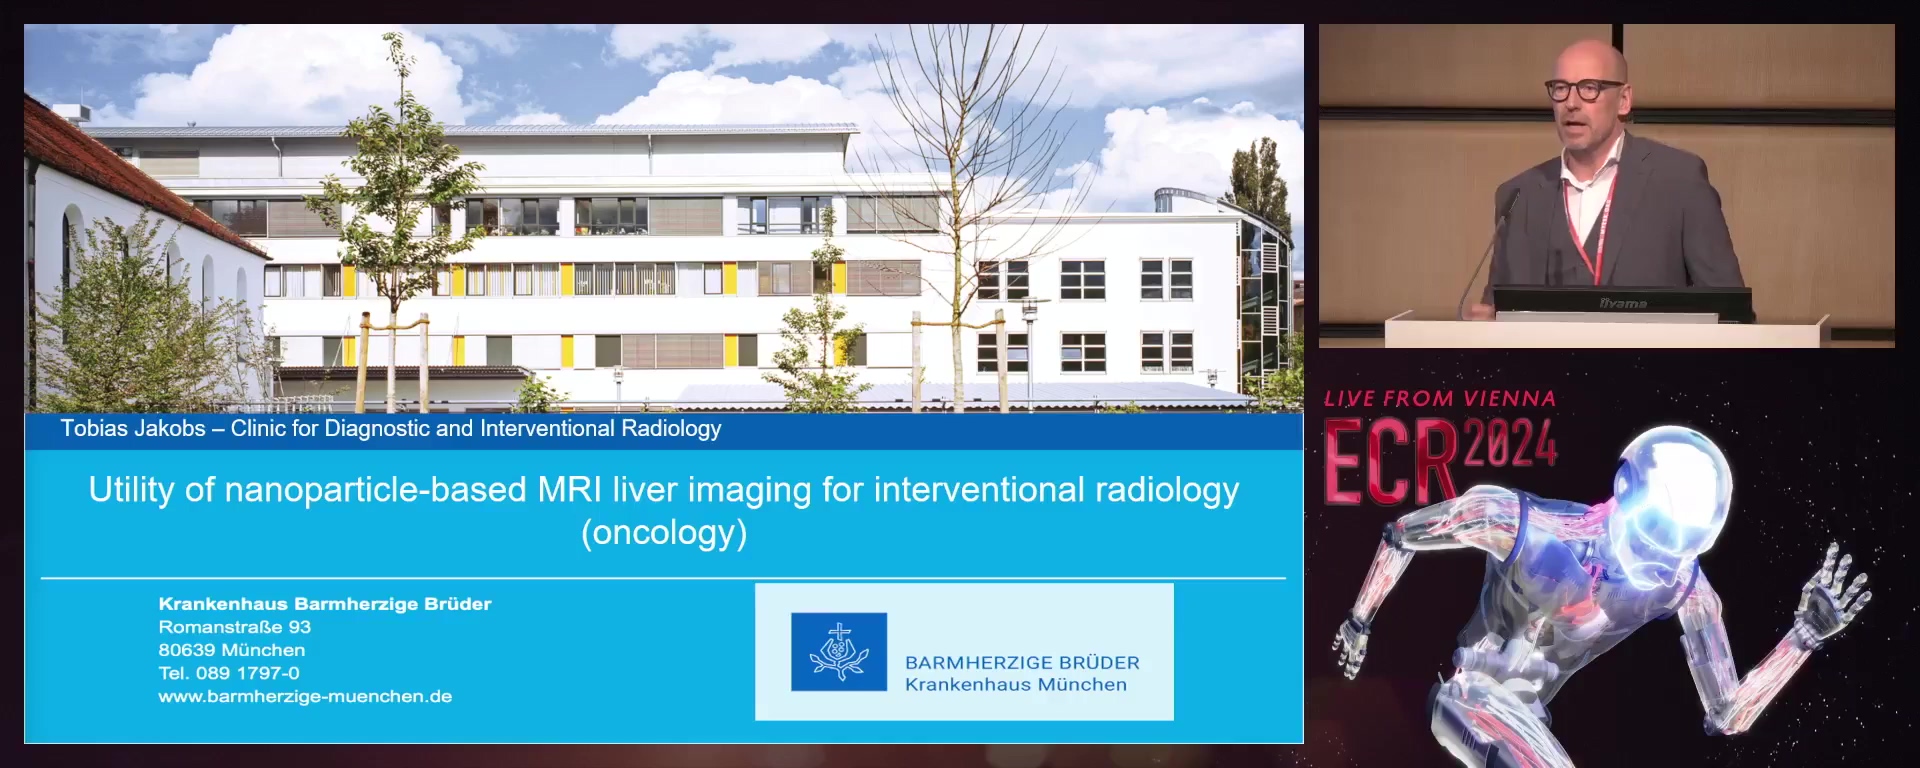 Utility of nanoparticle-based MRI liver imaging for interventional radiology